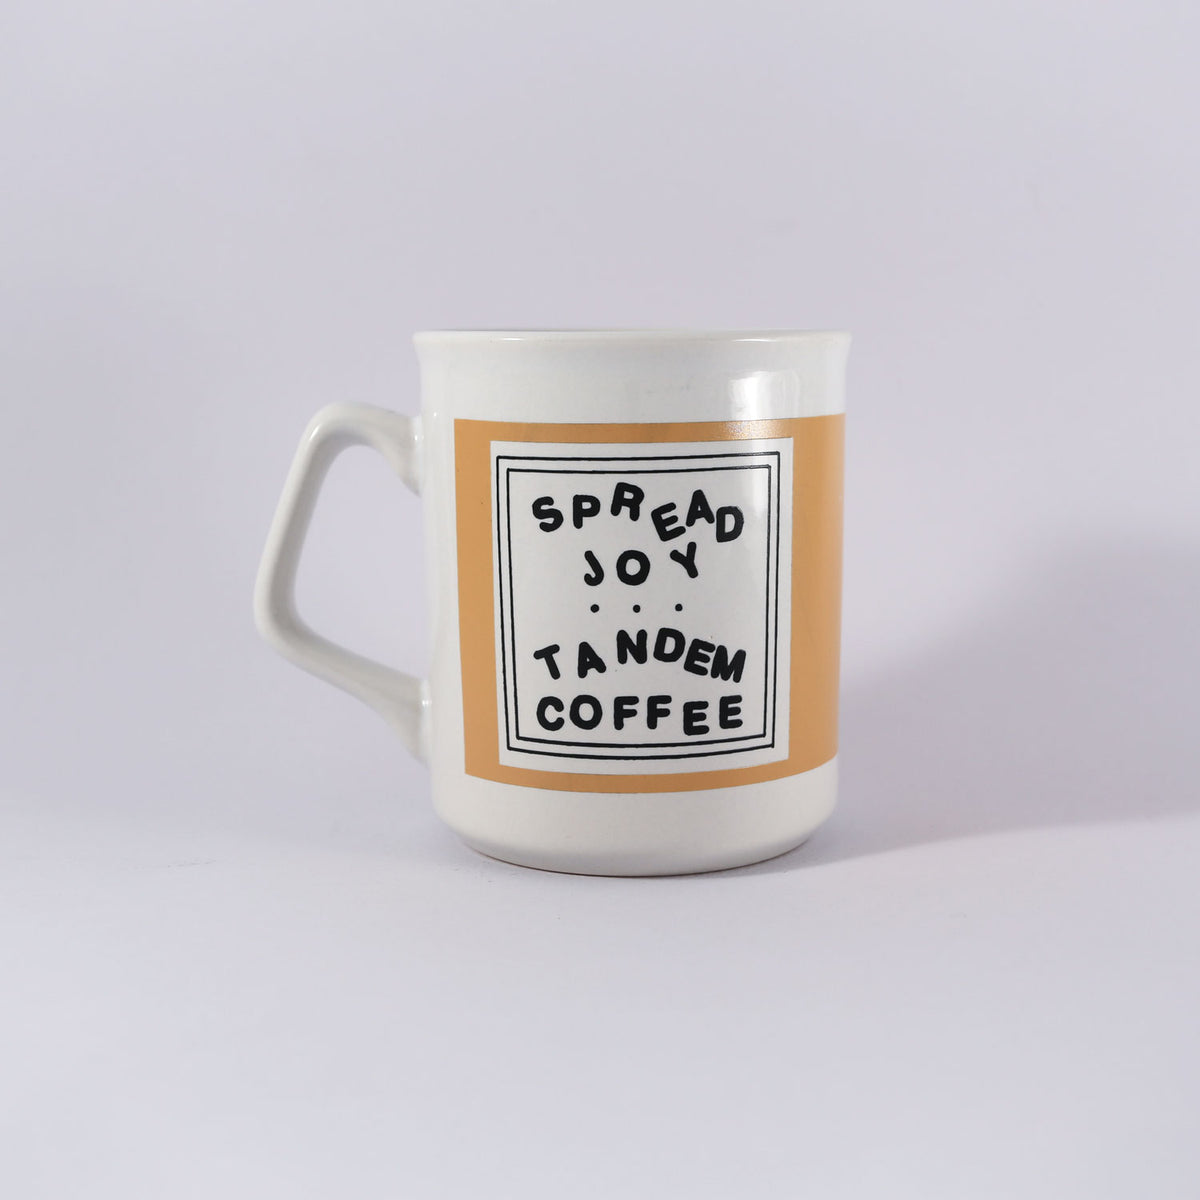 A white ceramic mug with a beige center band featuring the text "Kathy Heideman Spread Joy Mug" in a black square frame on a plain background, recommended for handwash only. Made by Tandem Coffee Roasters.